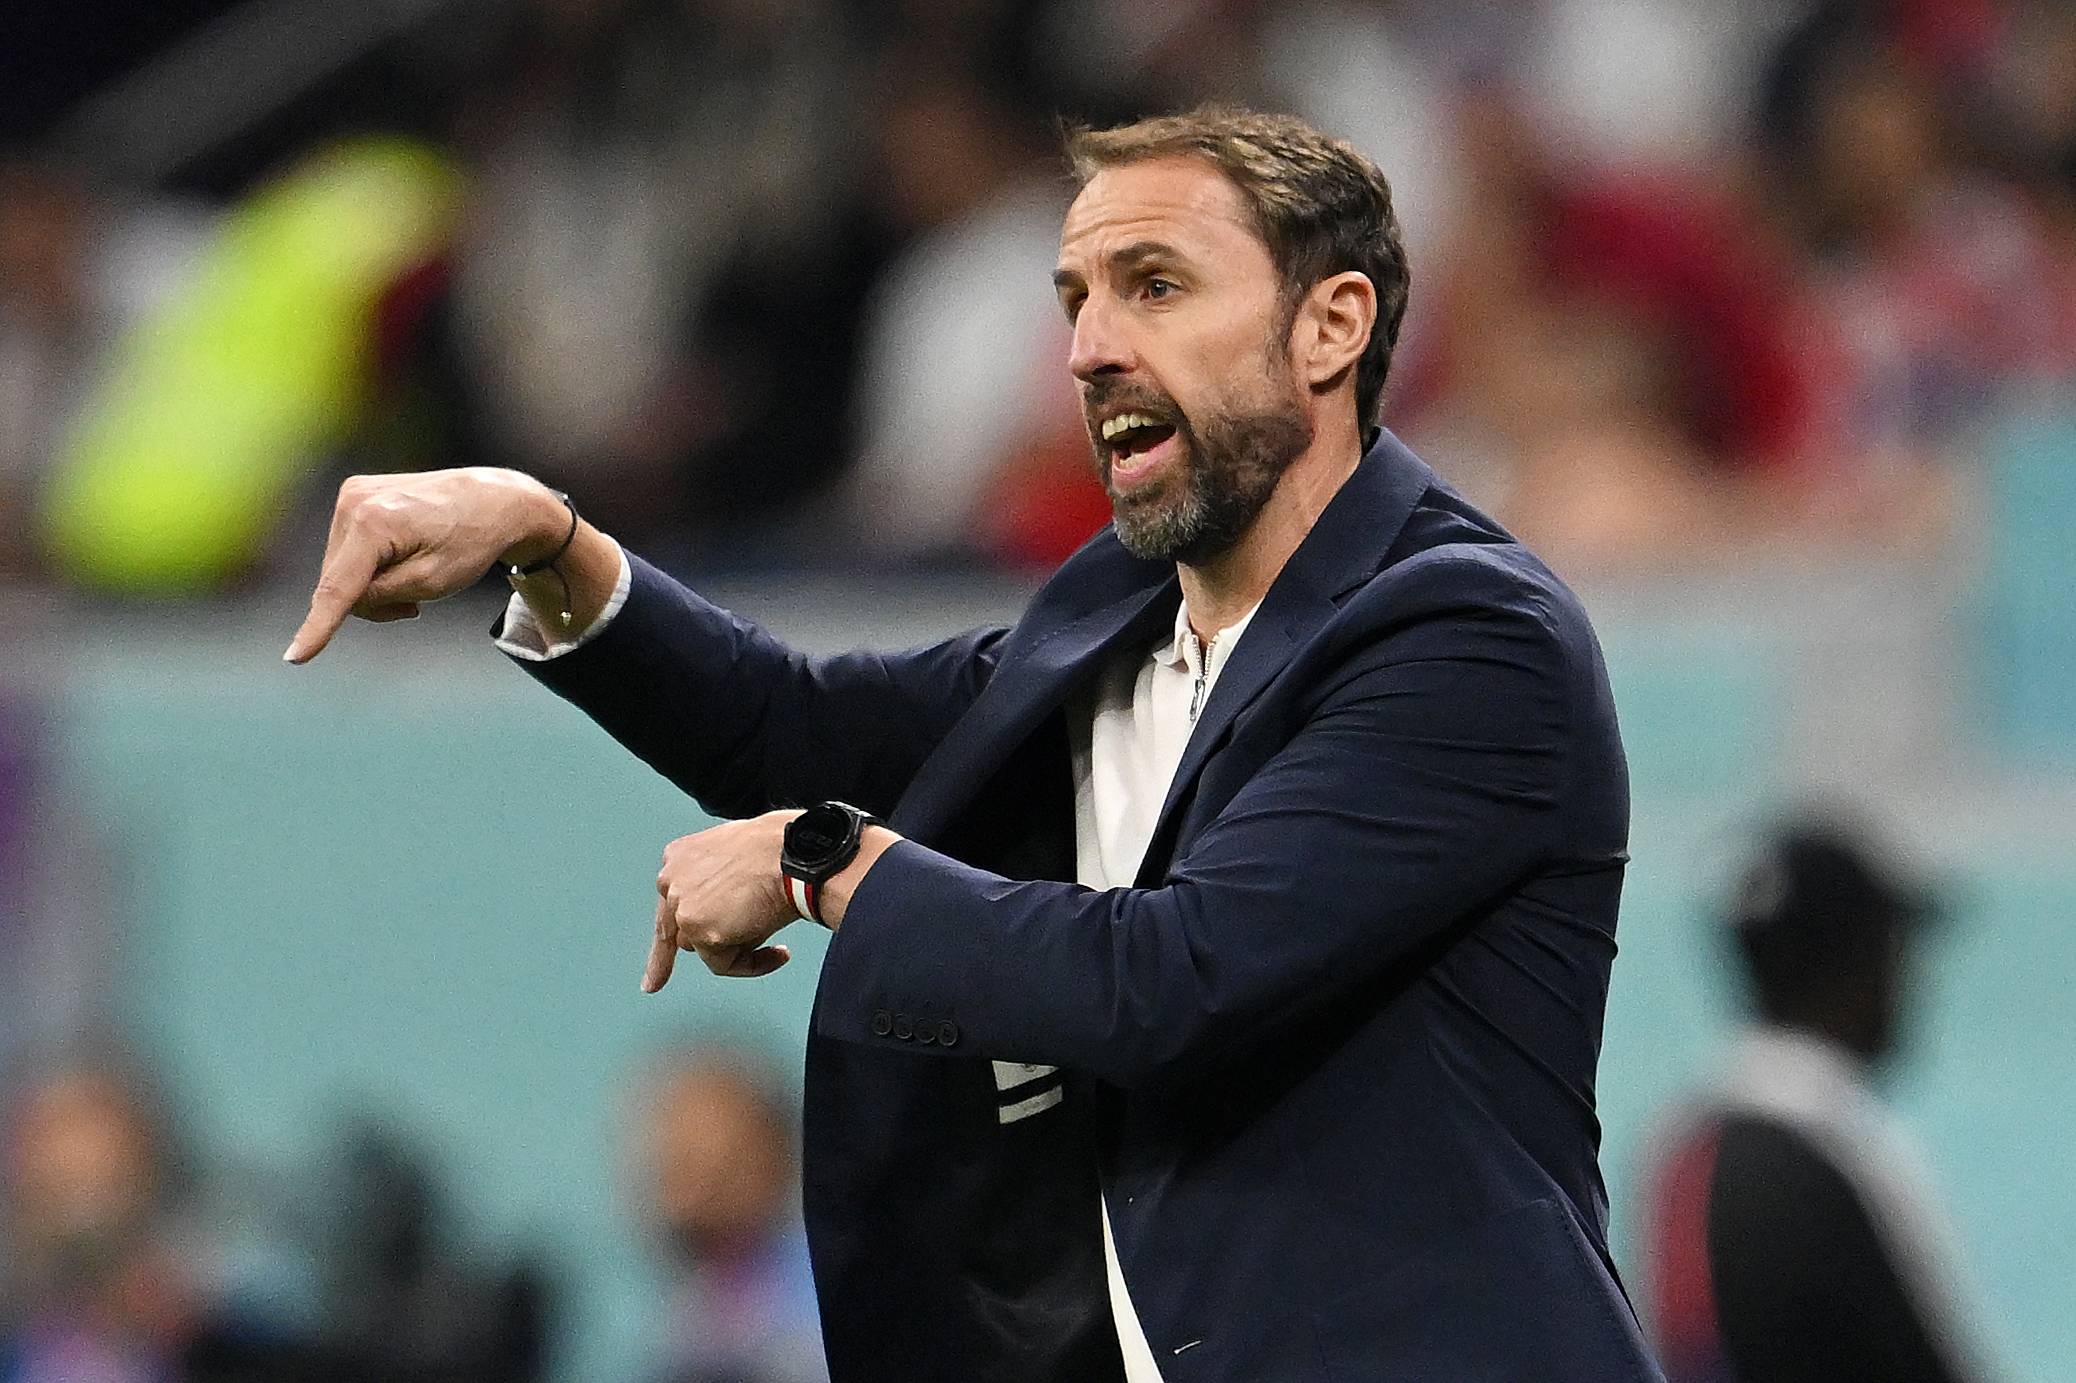 England's Southgate gives tactical instructions.